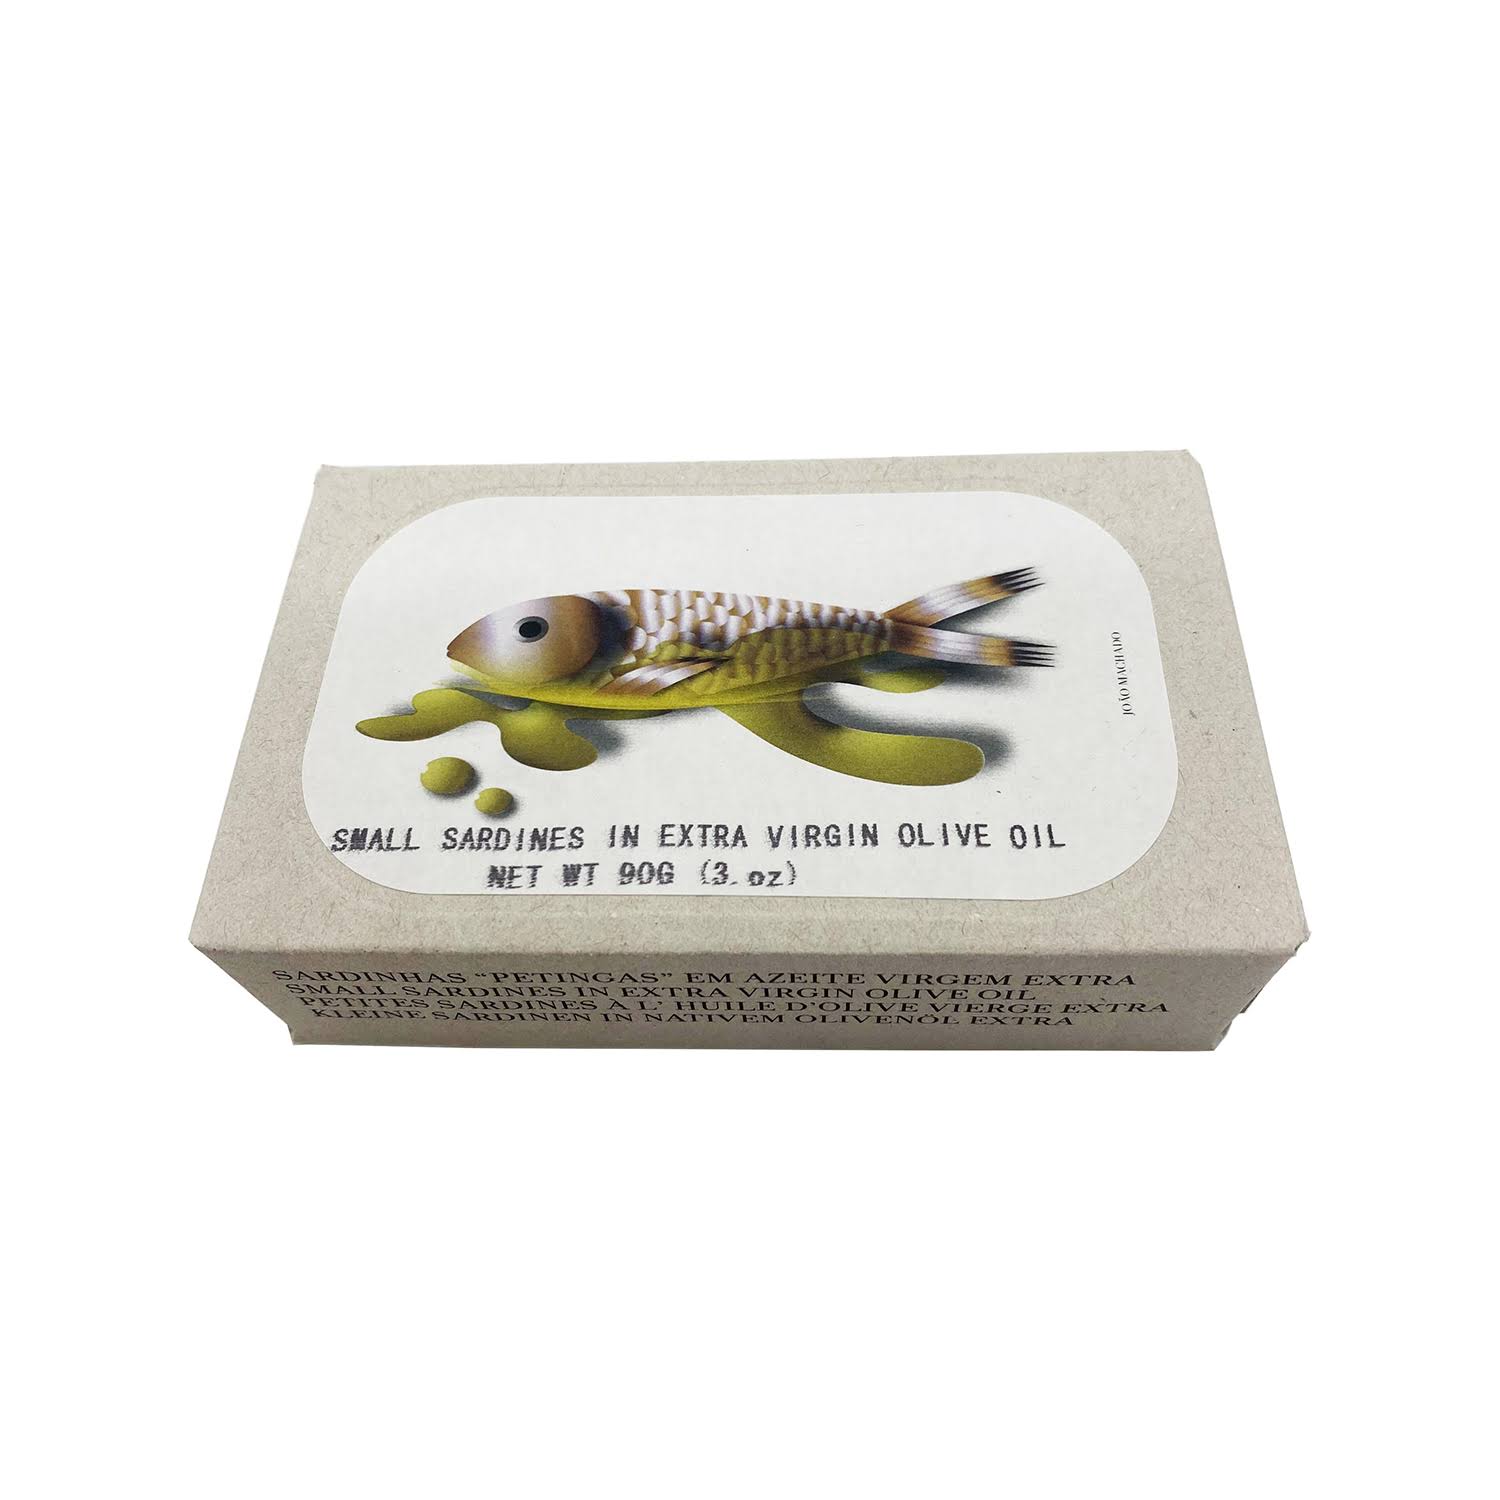 Jose Gourmet Small Sardines in Extra Virgin Olive Oil